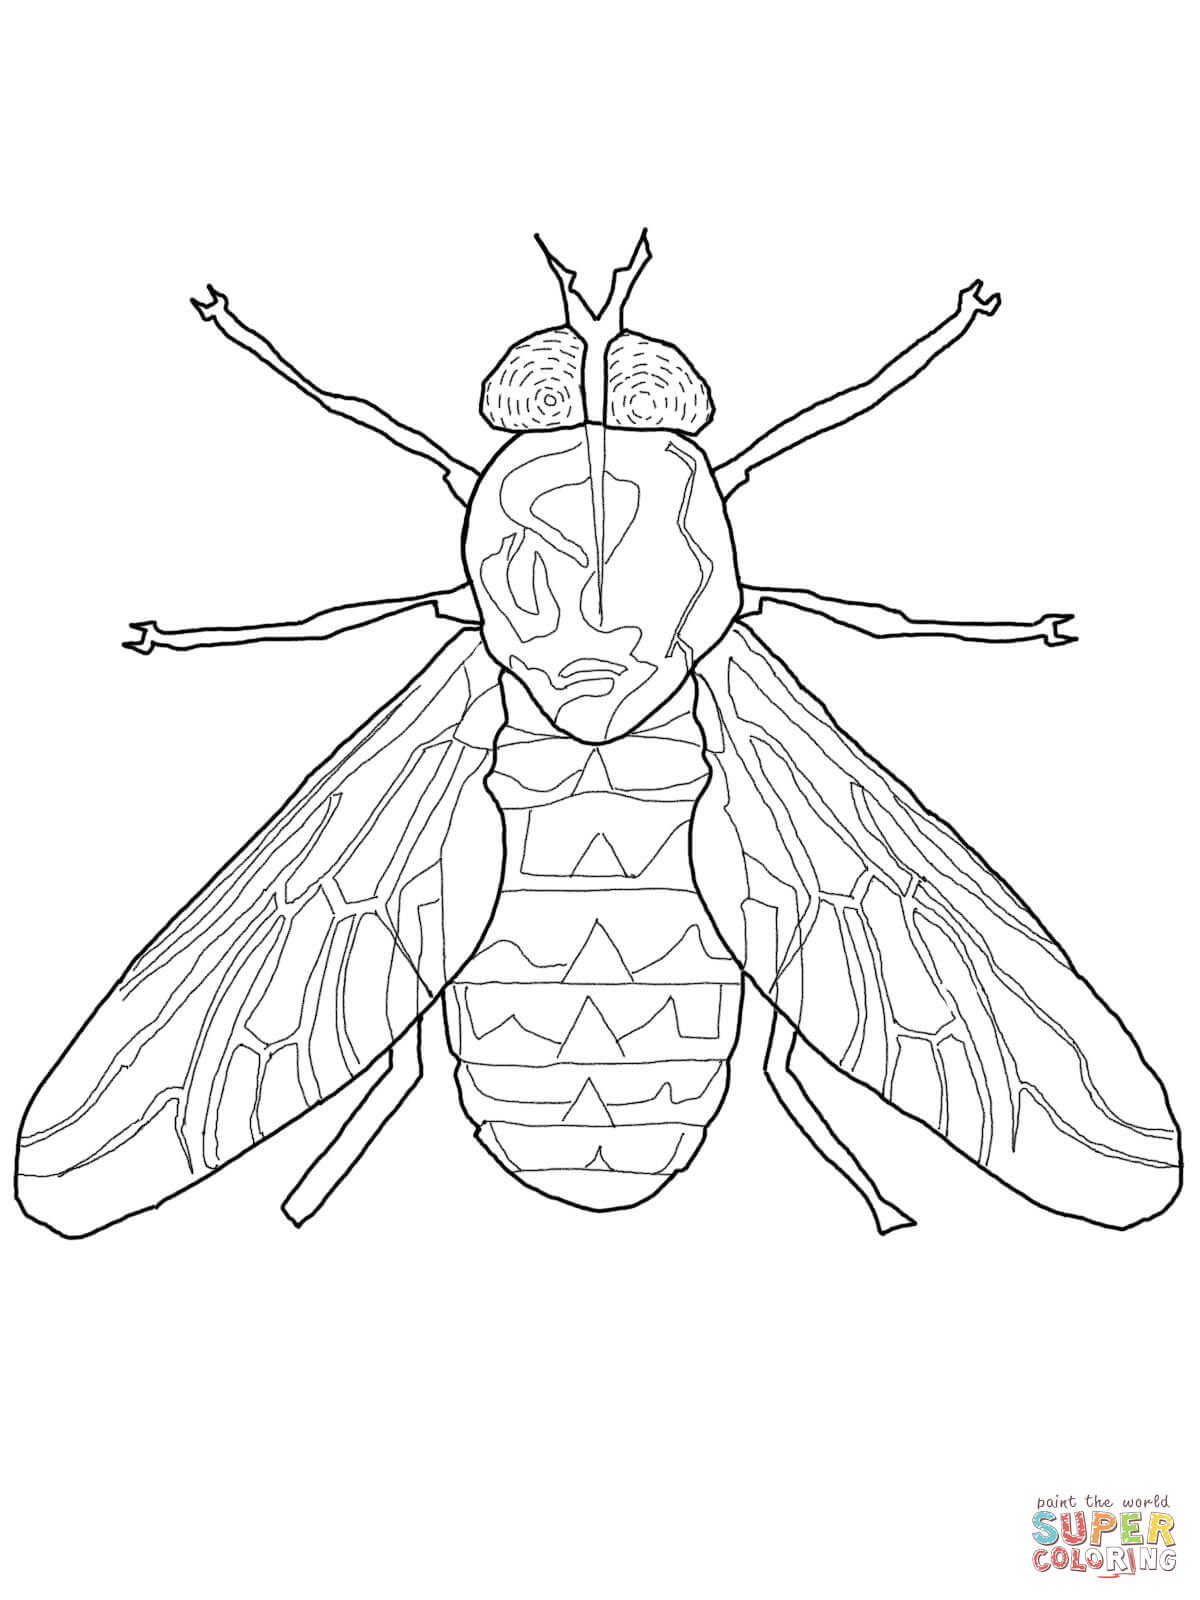 Horse-fly coloring #14, Download drawings